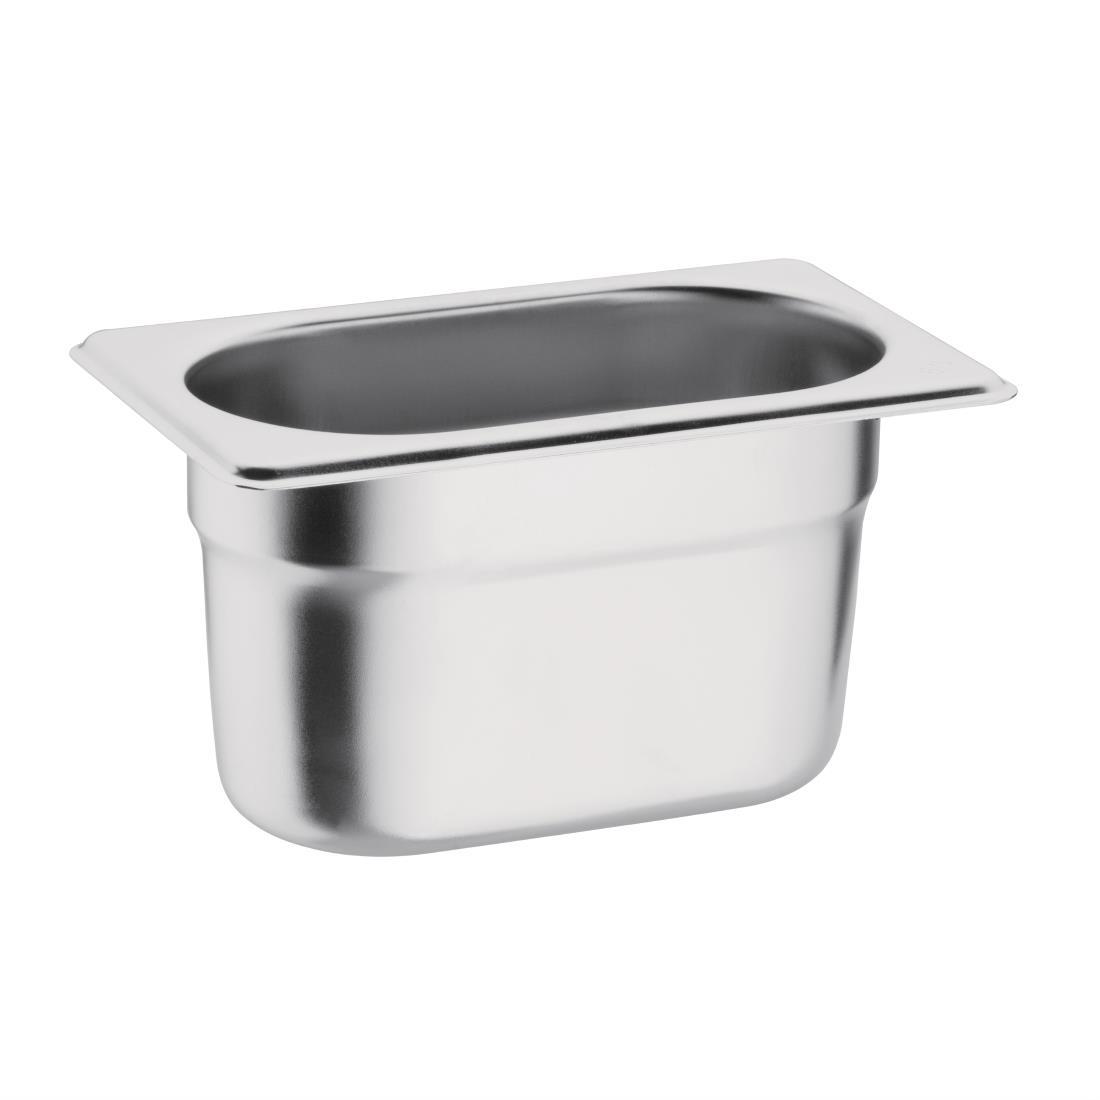 Container GN 1/9 H 10 cm stainless steel : Stellinox